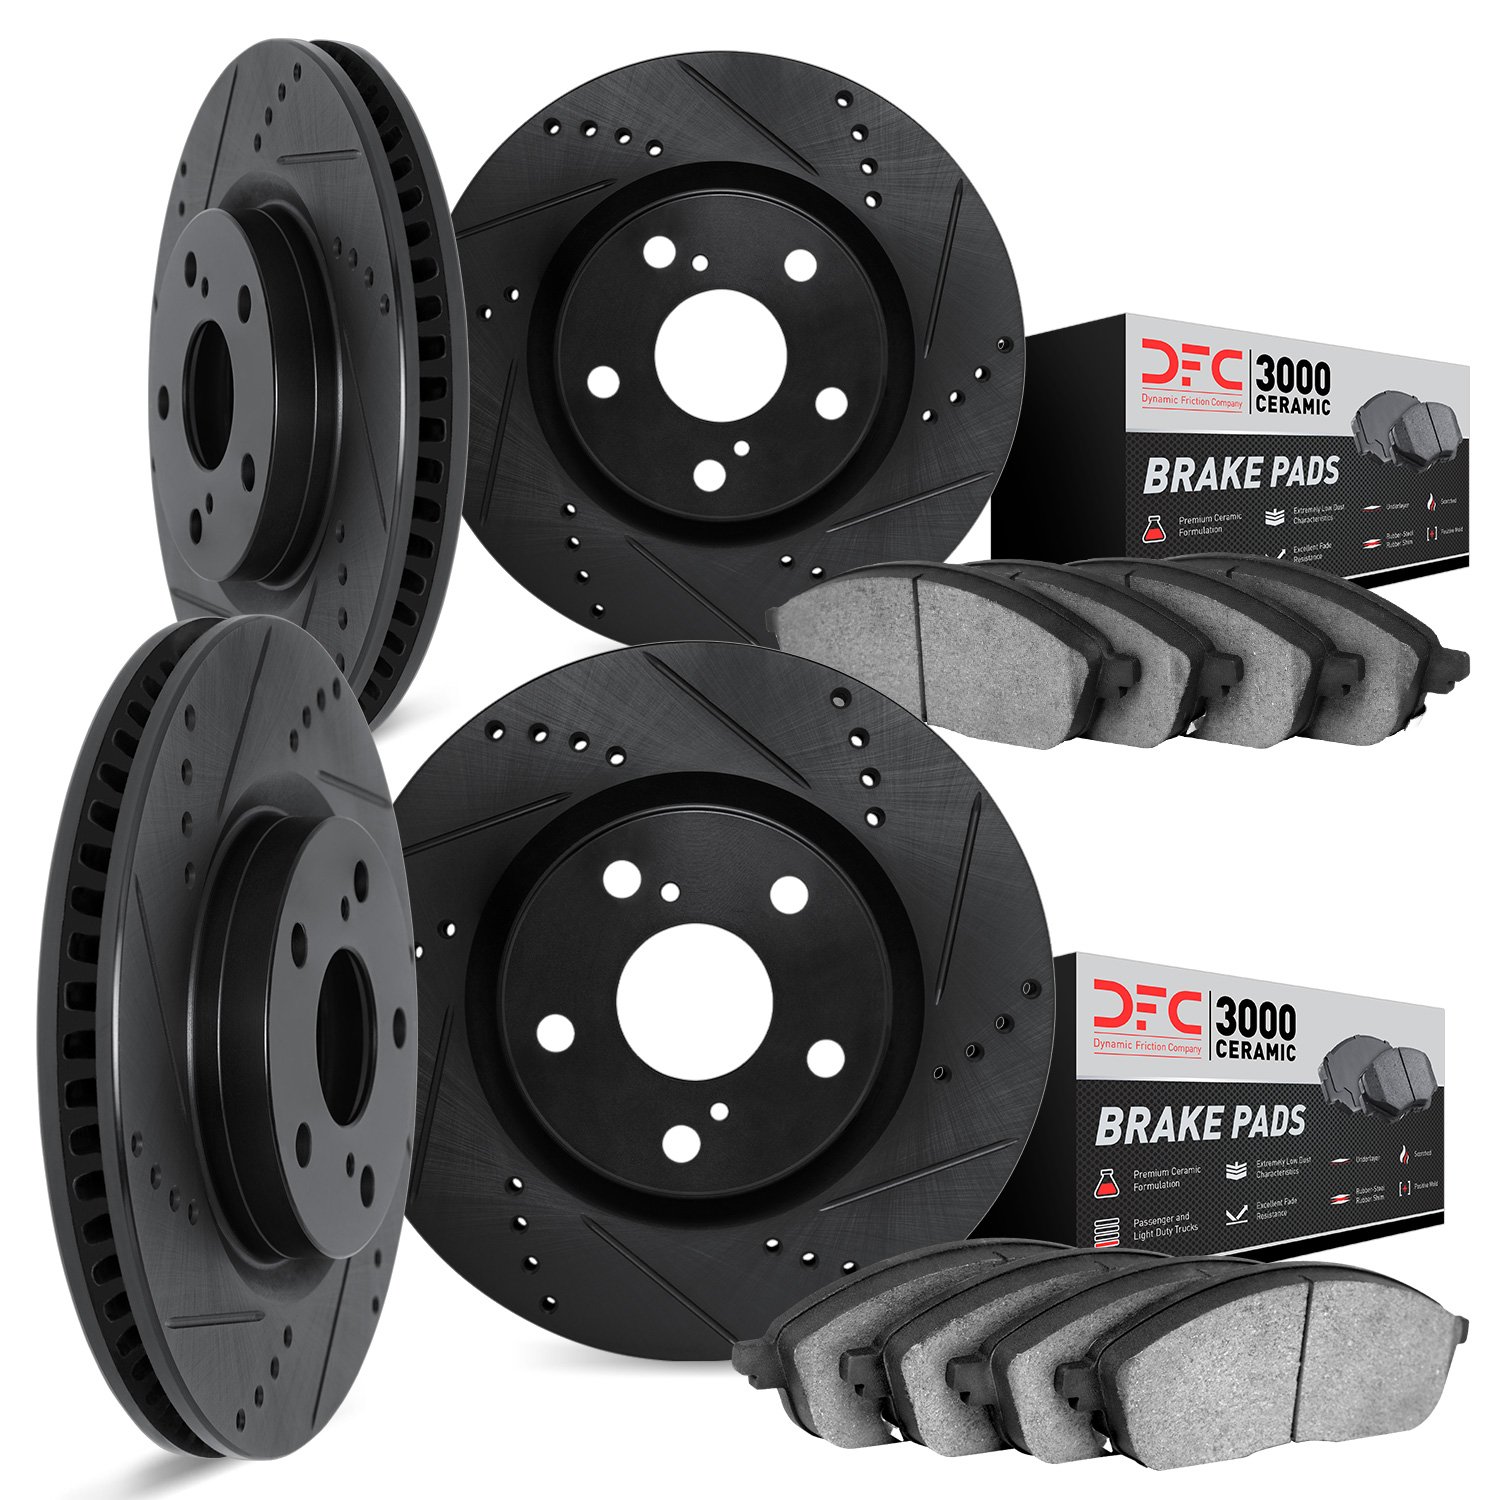 8304-46005 Drilled/Slotted Brake Rotors with 3000-Series Ceramic Brake Pads Kit [Black], 1997-2009 GM, Position: Front and Rear